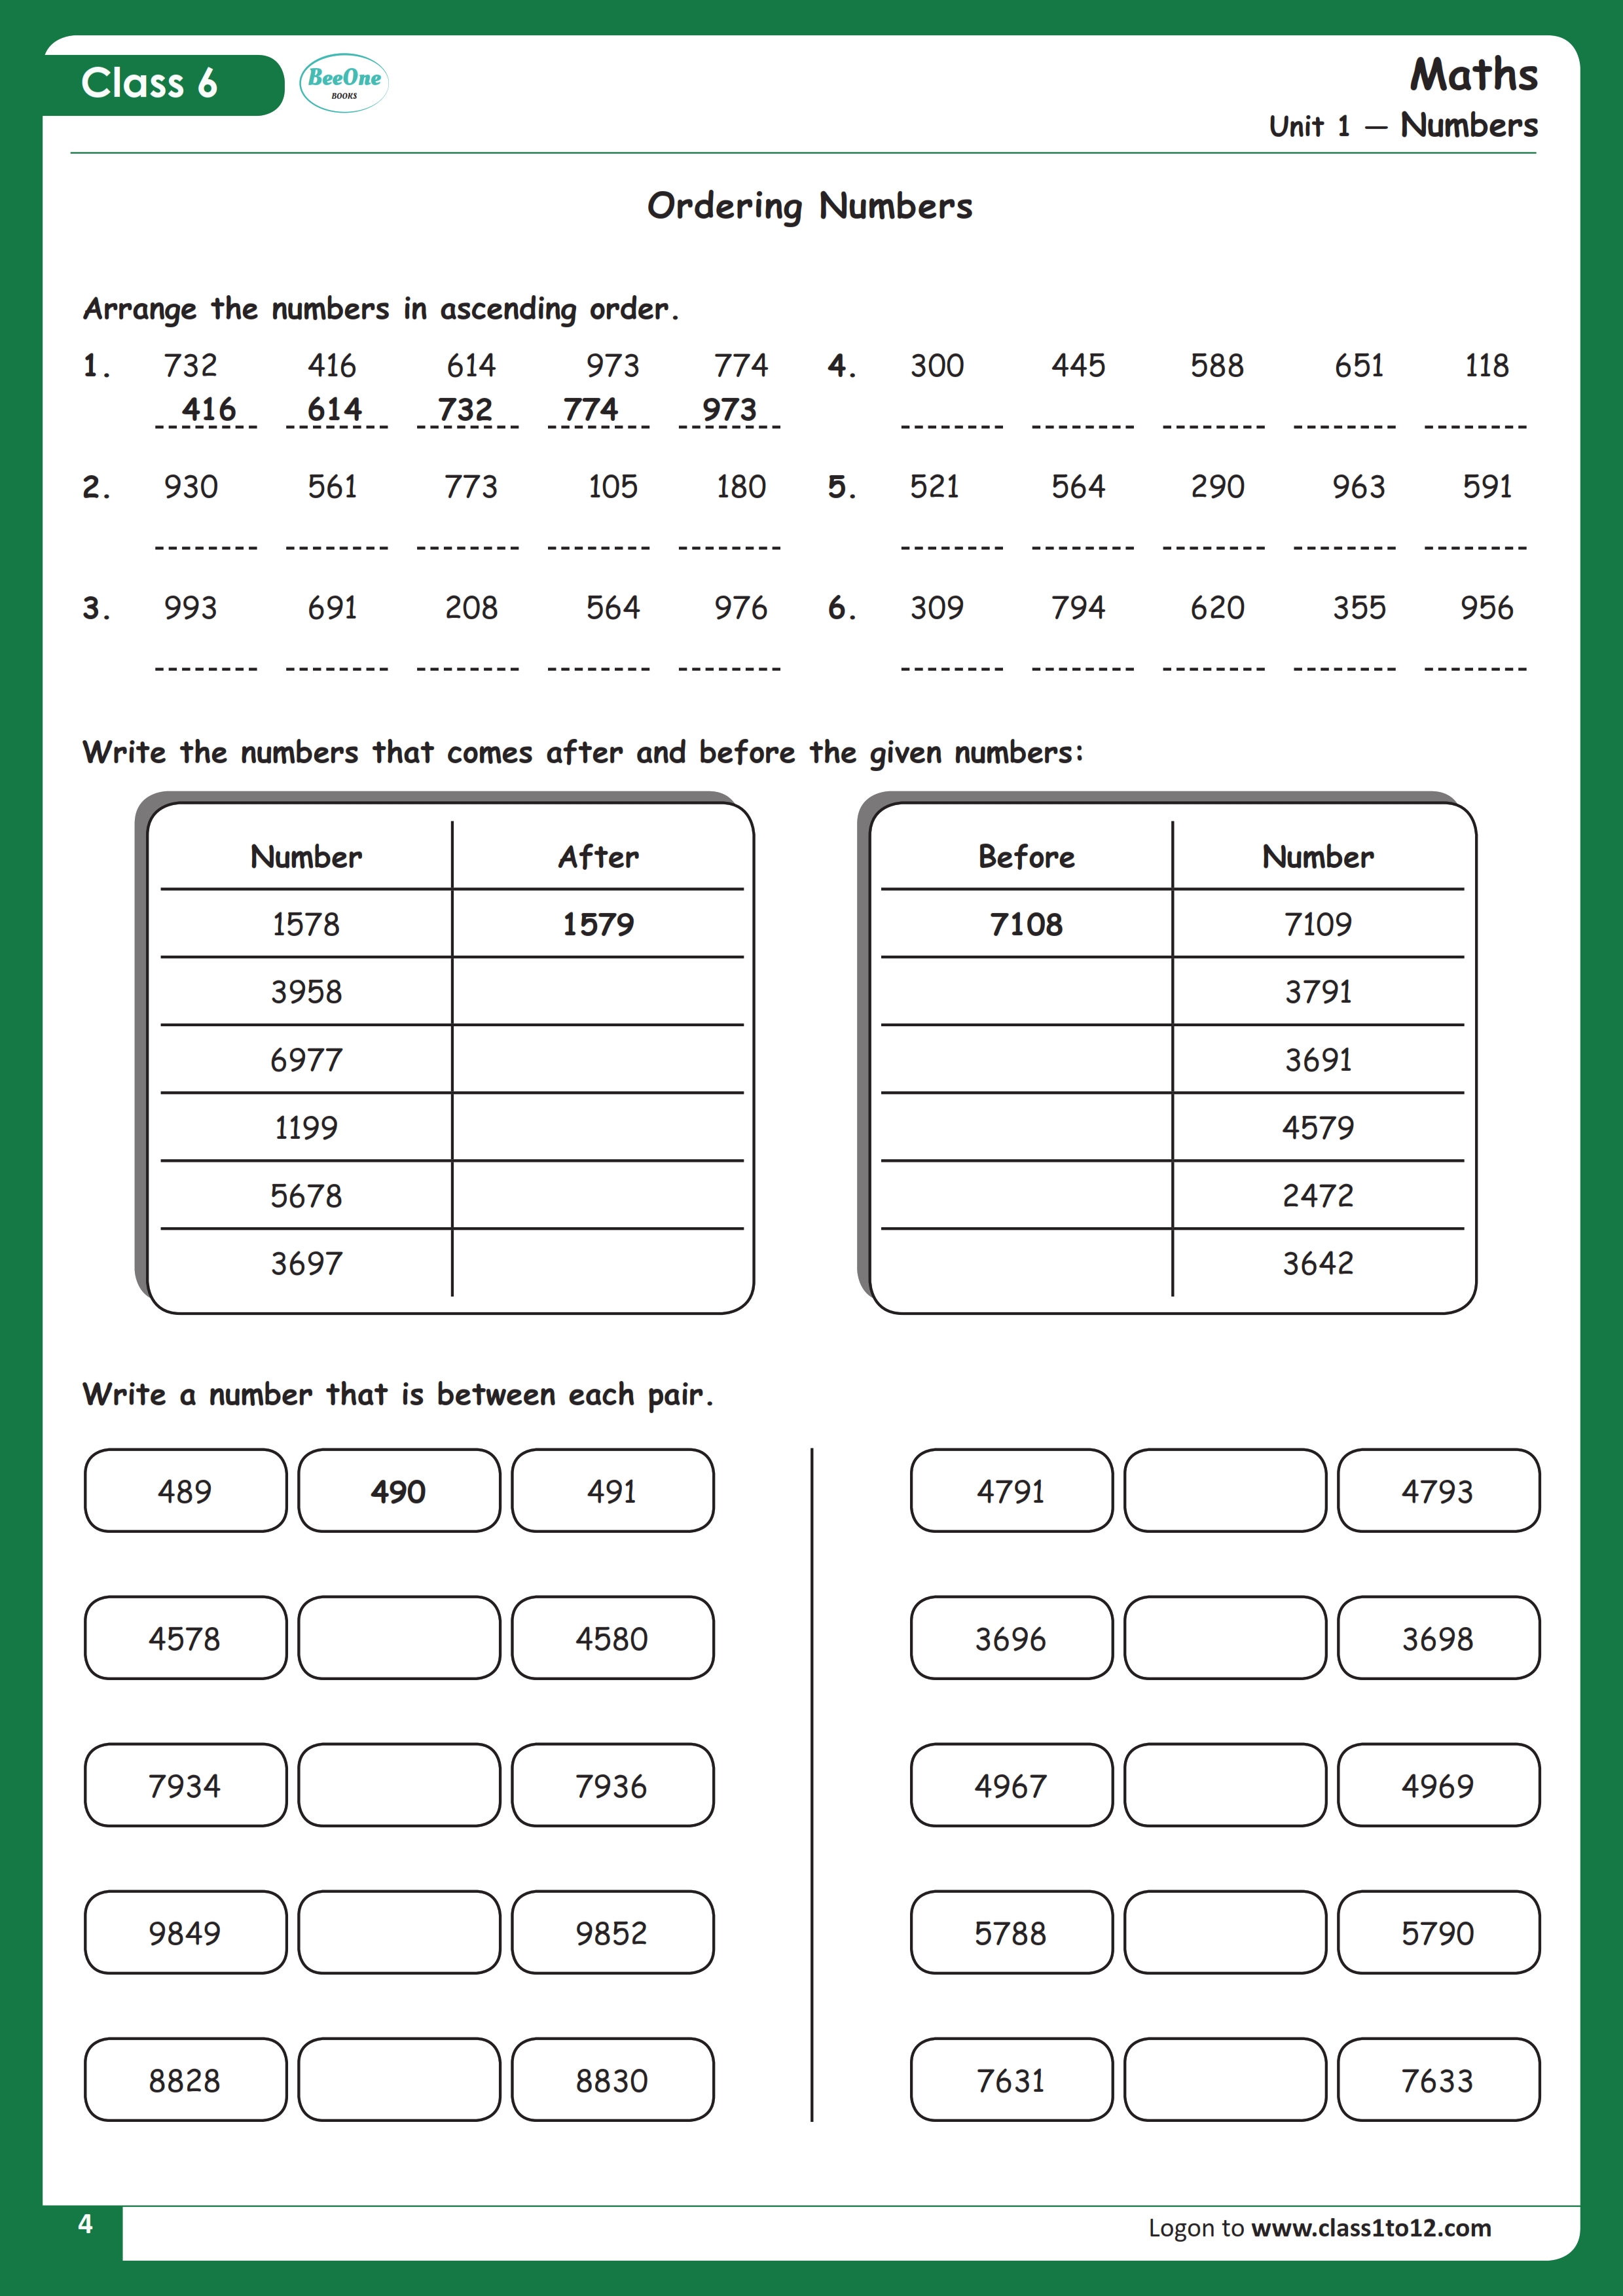 cbse-class-6-maths-knowing-our-numbers-worksheet-class1to12